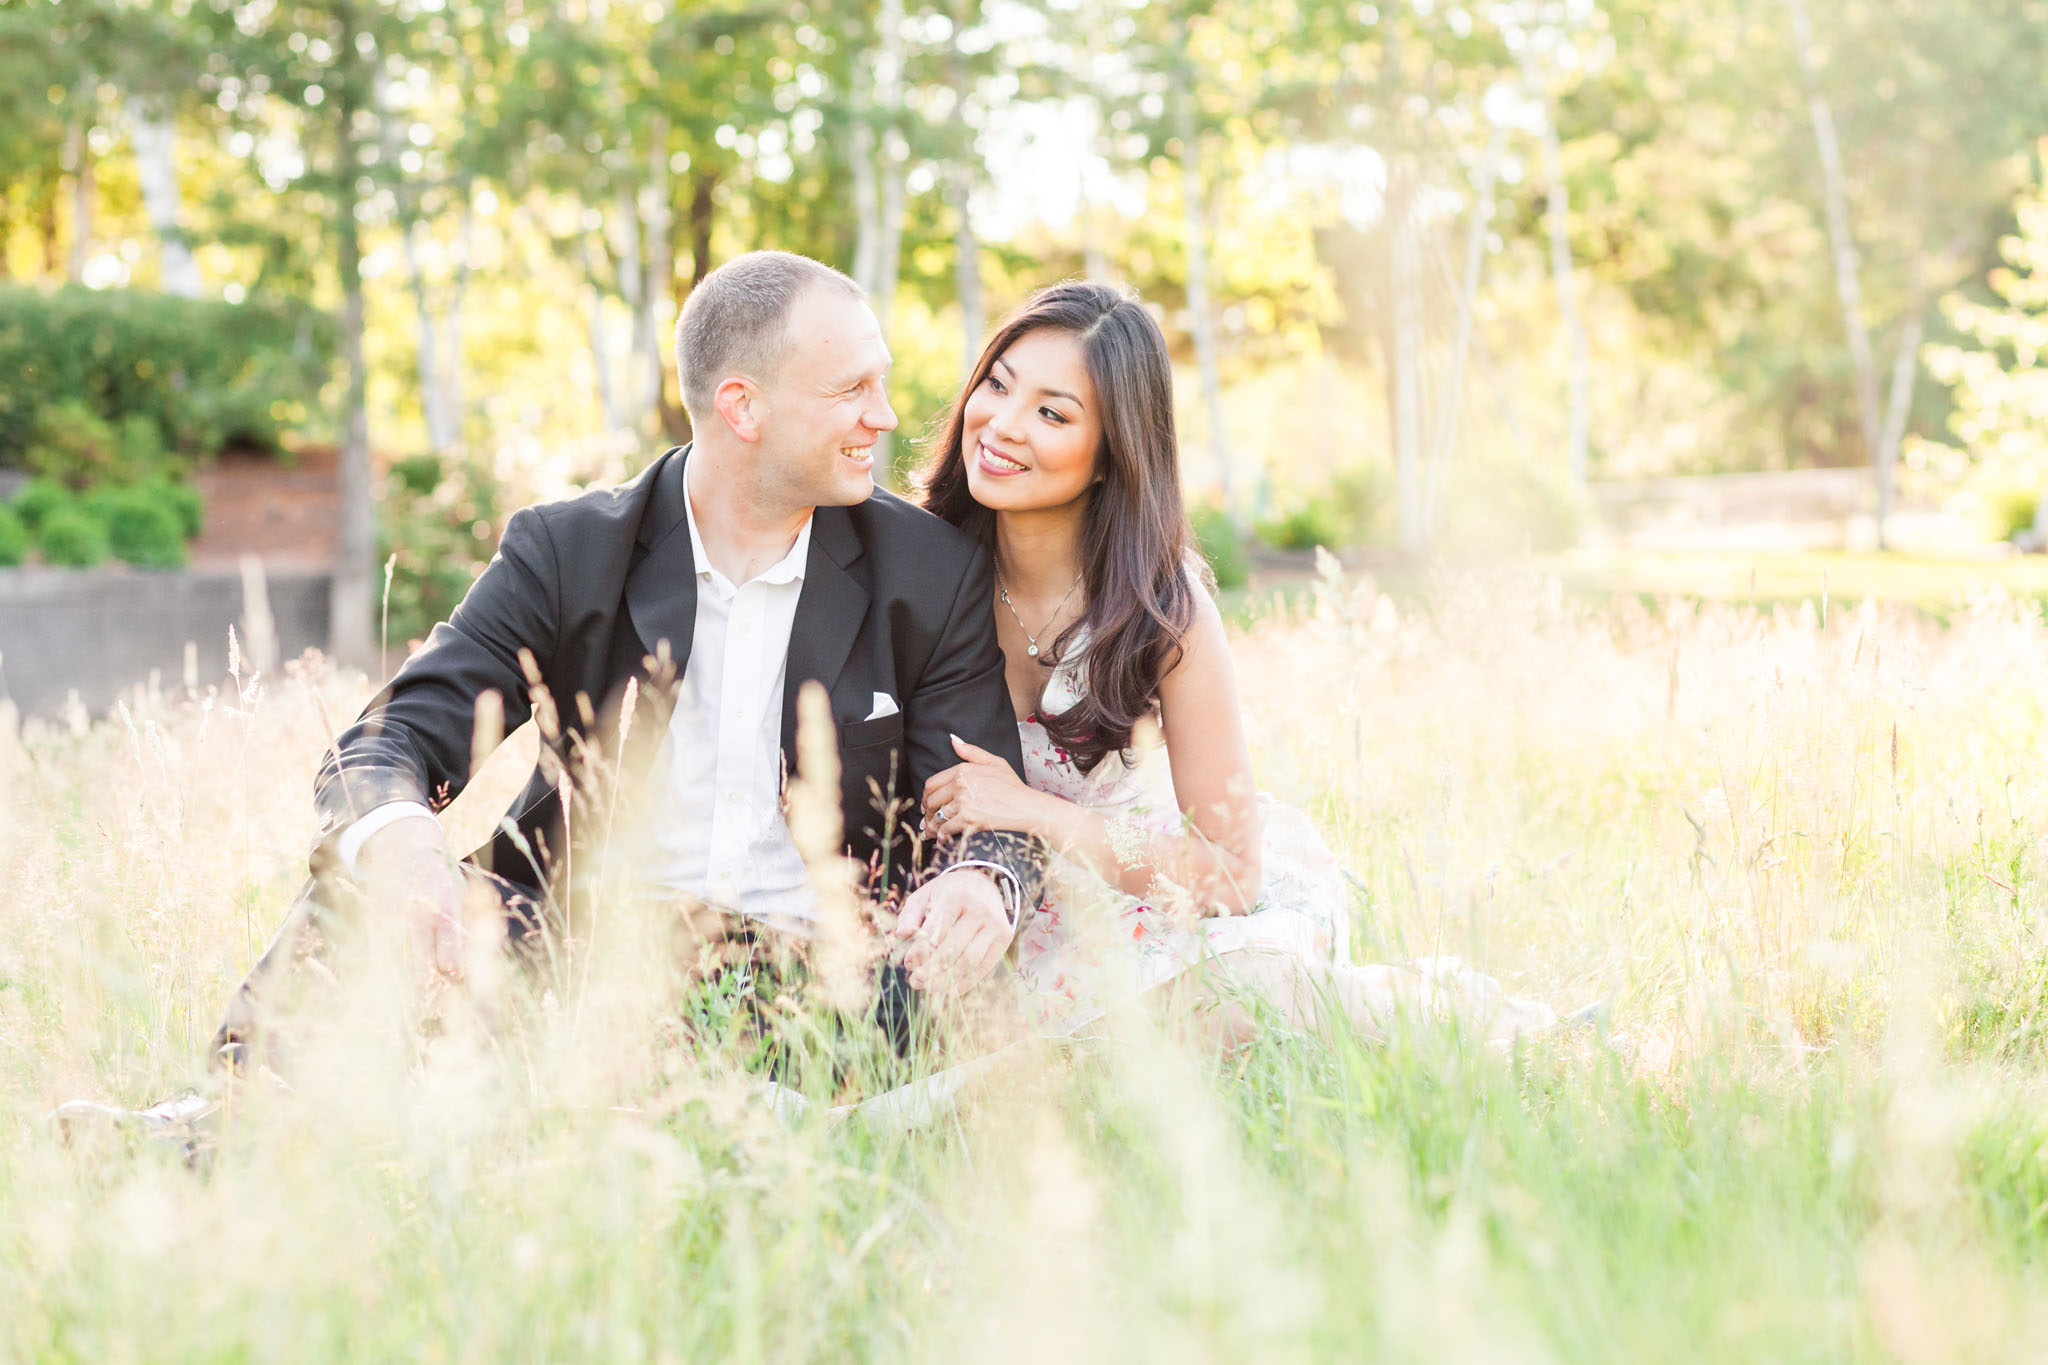 formal engagement session in a field in hillsboro, oregon - portland wedding photographer